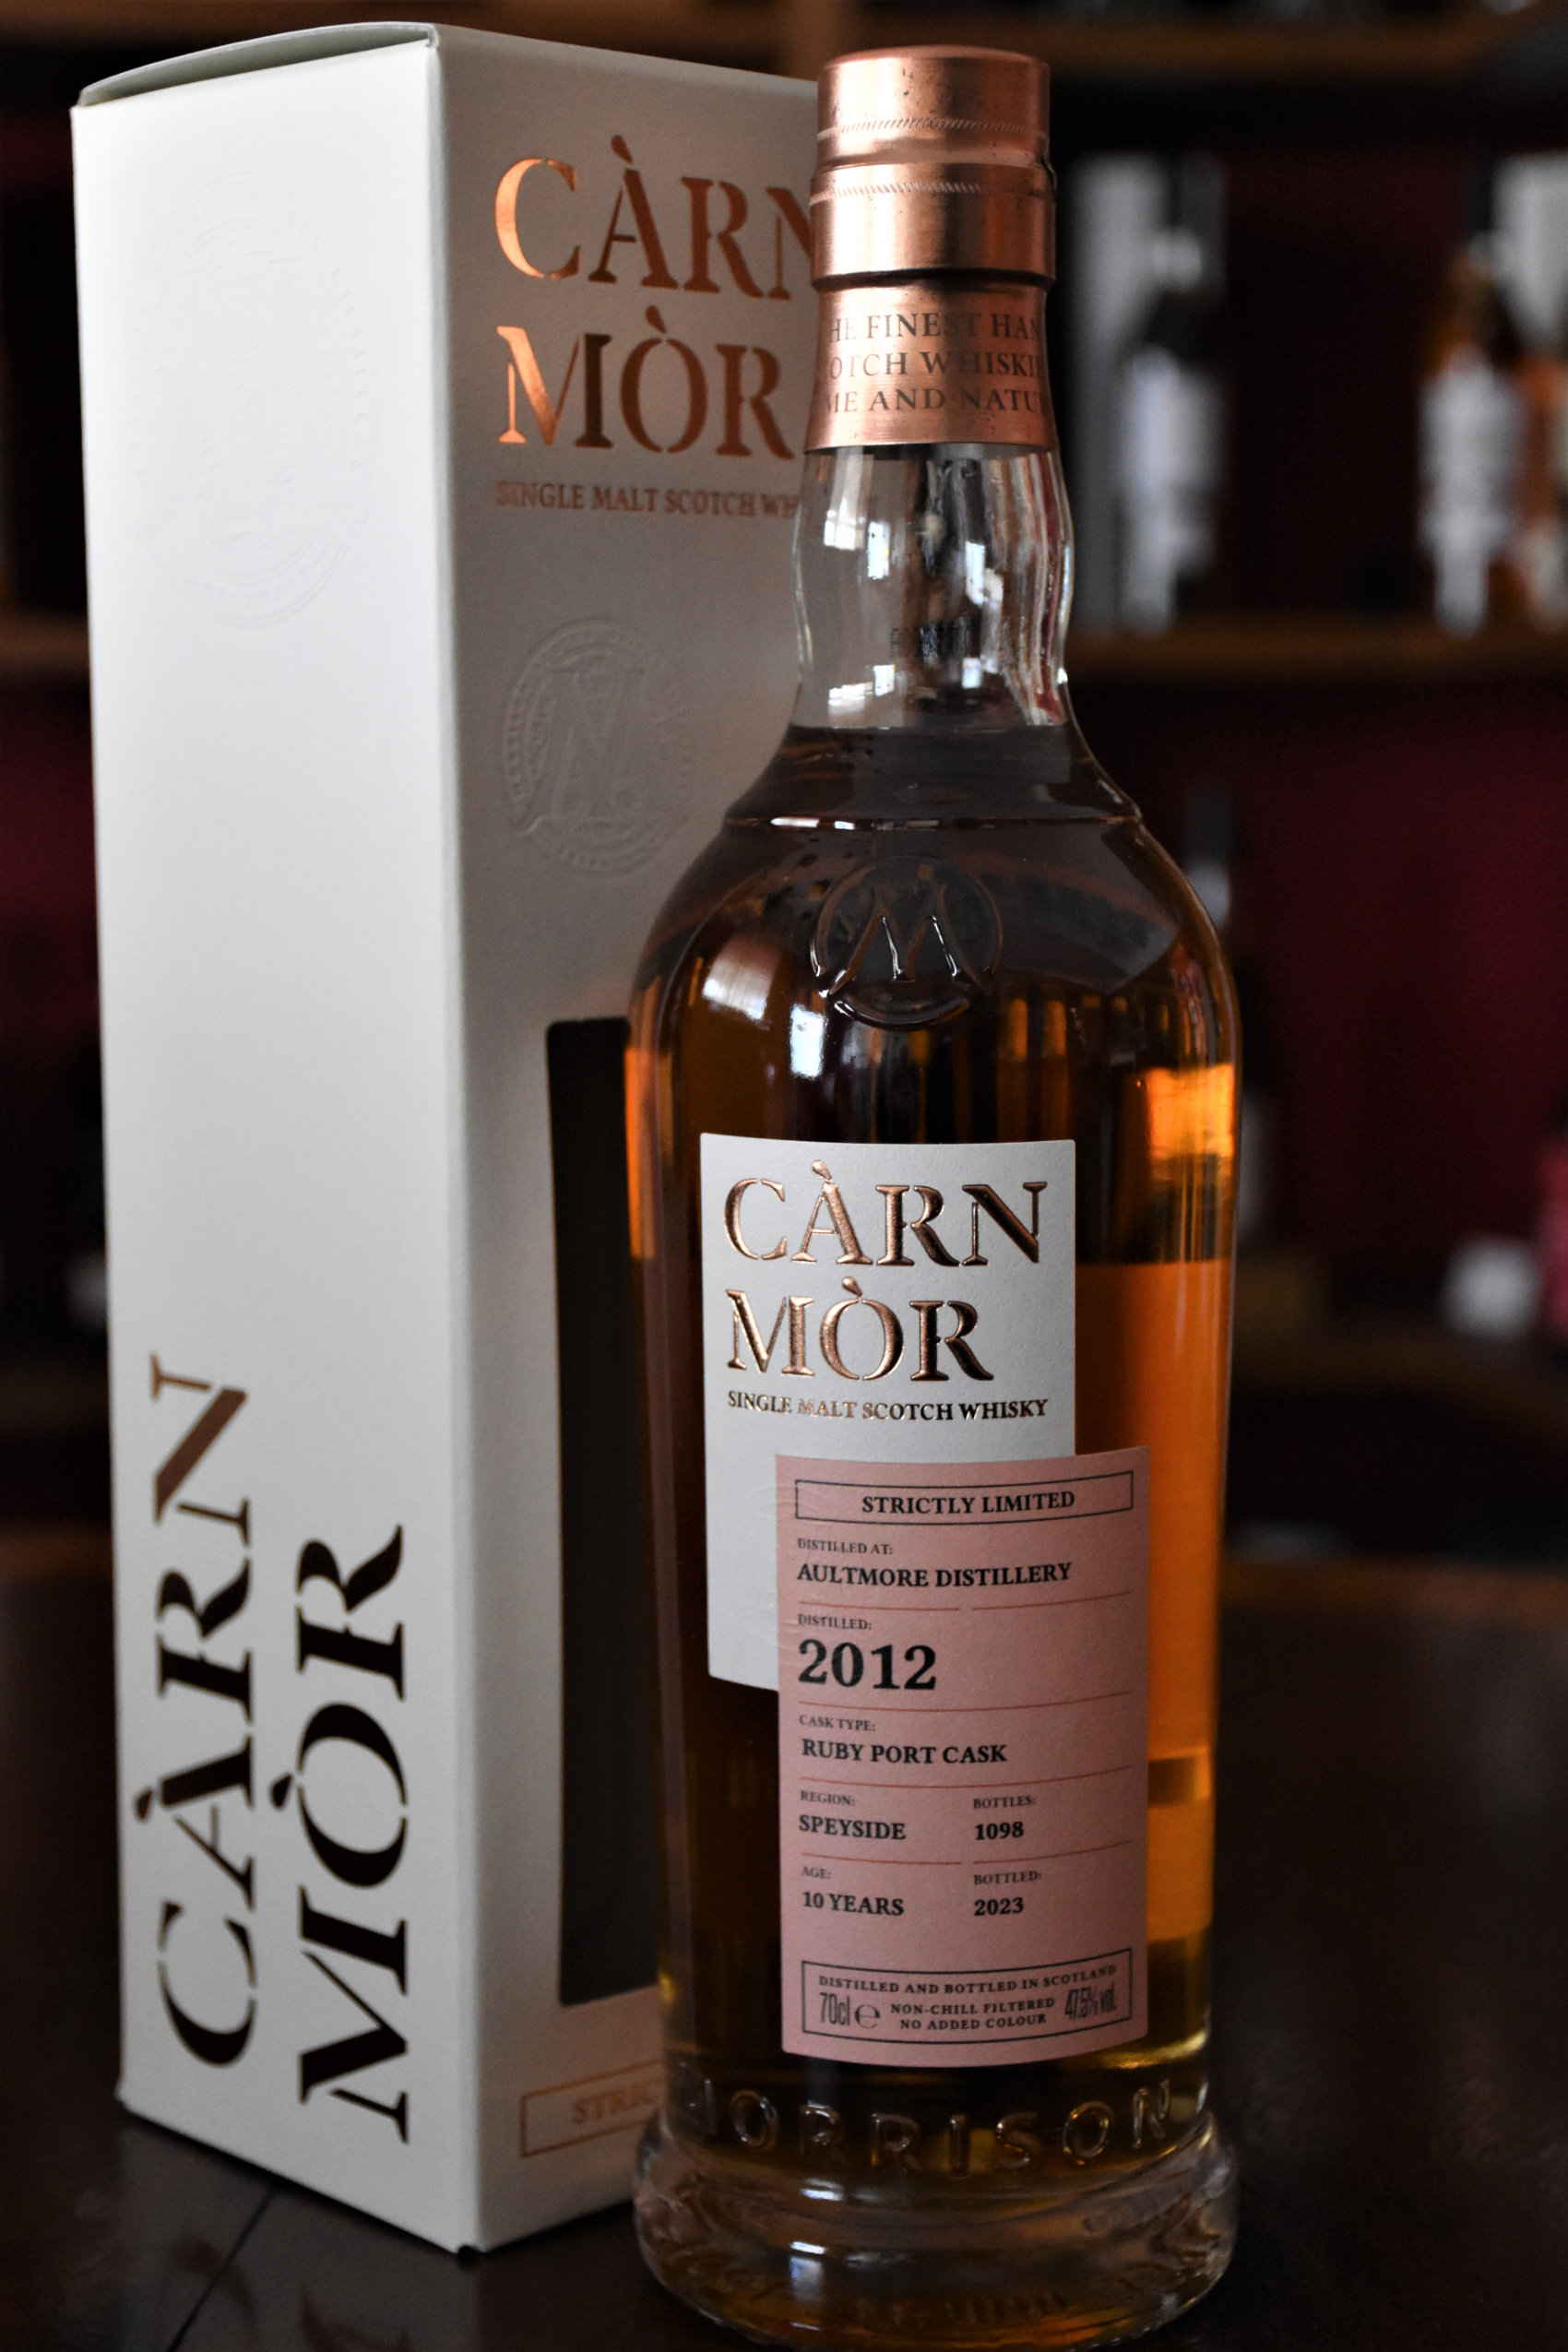 Aultmore 2012, 10 y.o., Ruby Port Cask - Strictly Limited Edition, 47,5% Alc.Vol., Carn Mor